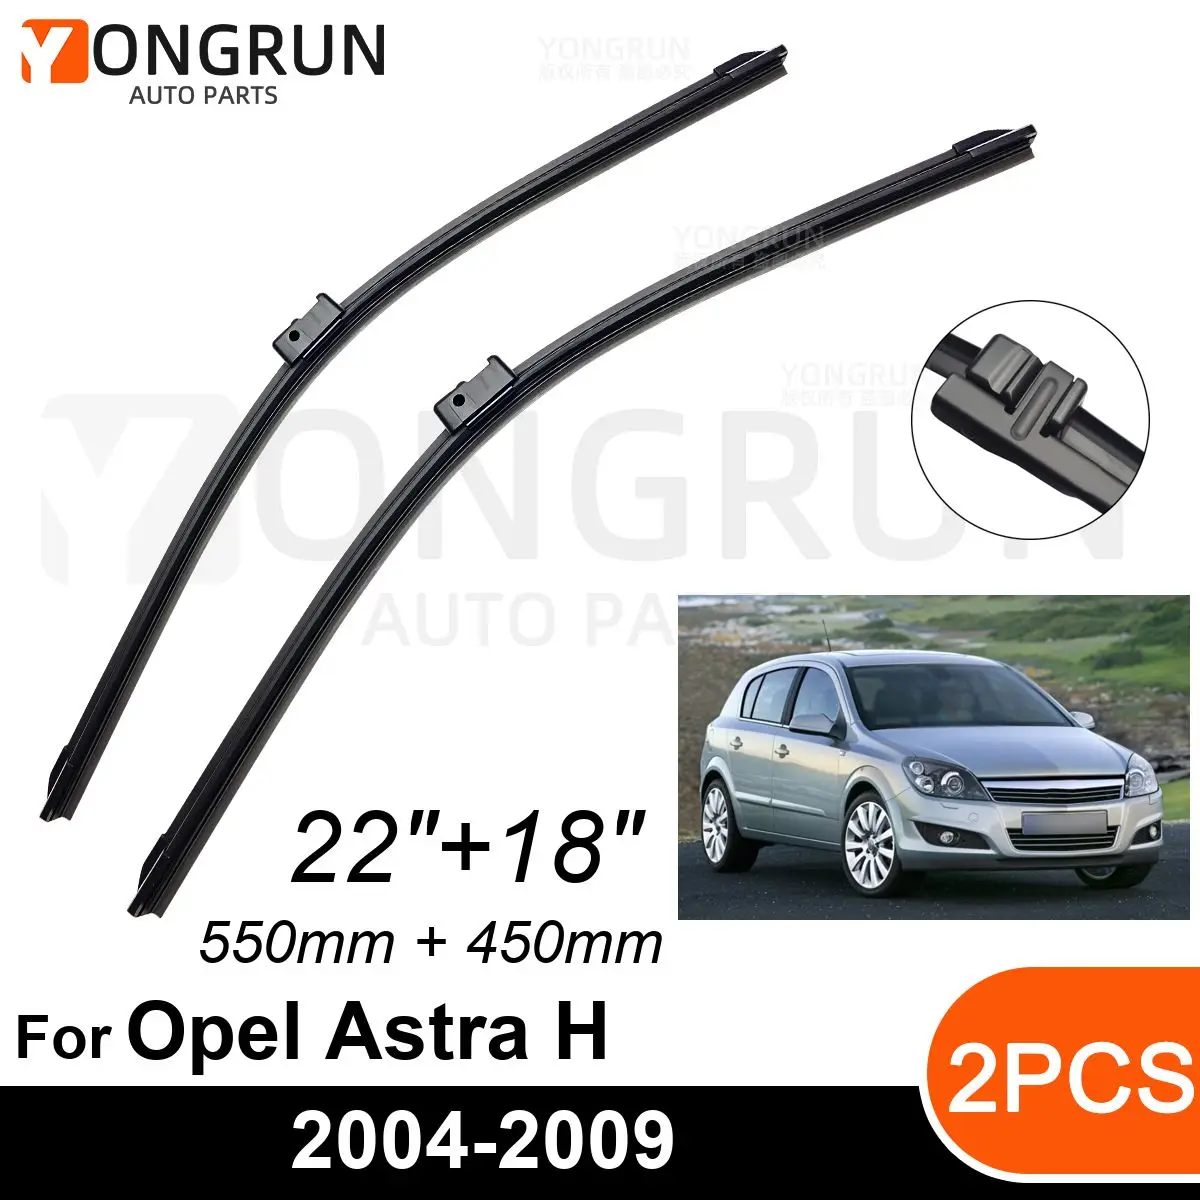 

Car Front Windshield Wipers For Opel Astra H 2004-2009 Wiper Blade Rubber 22"+18" Car Windshield Windscreen Accessories